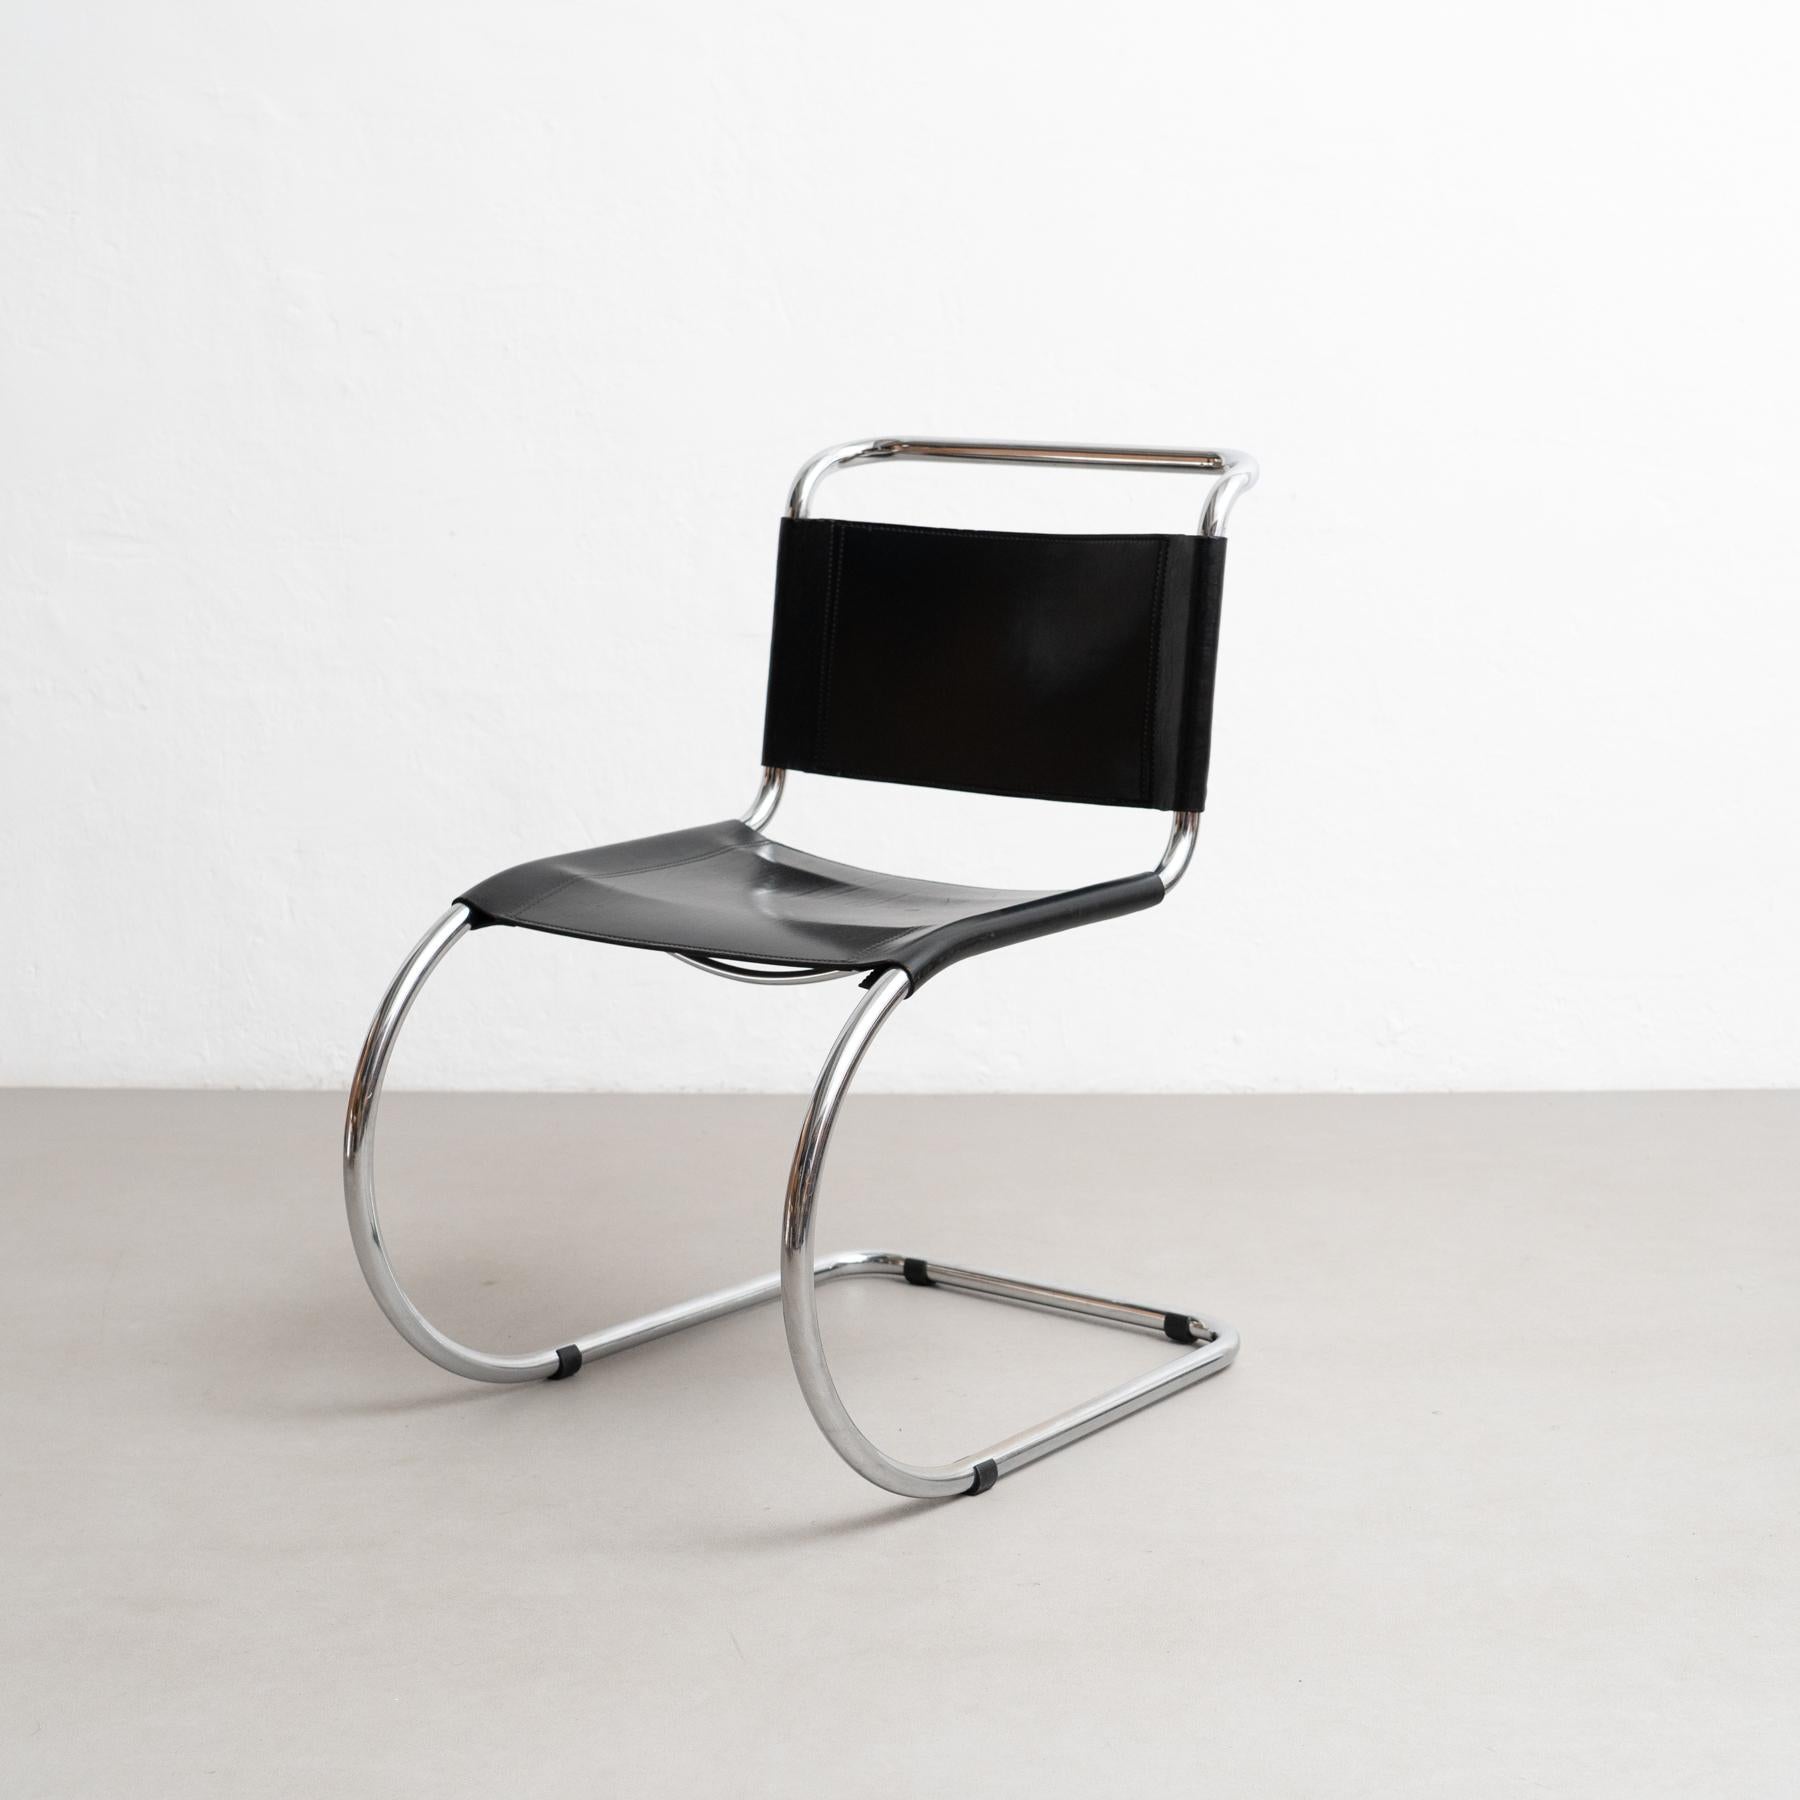 German Mies van der Rohe MR10 Black Leather Easy Chair, circa 1960 For Sale